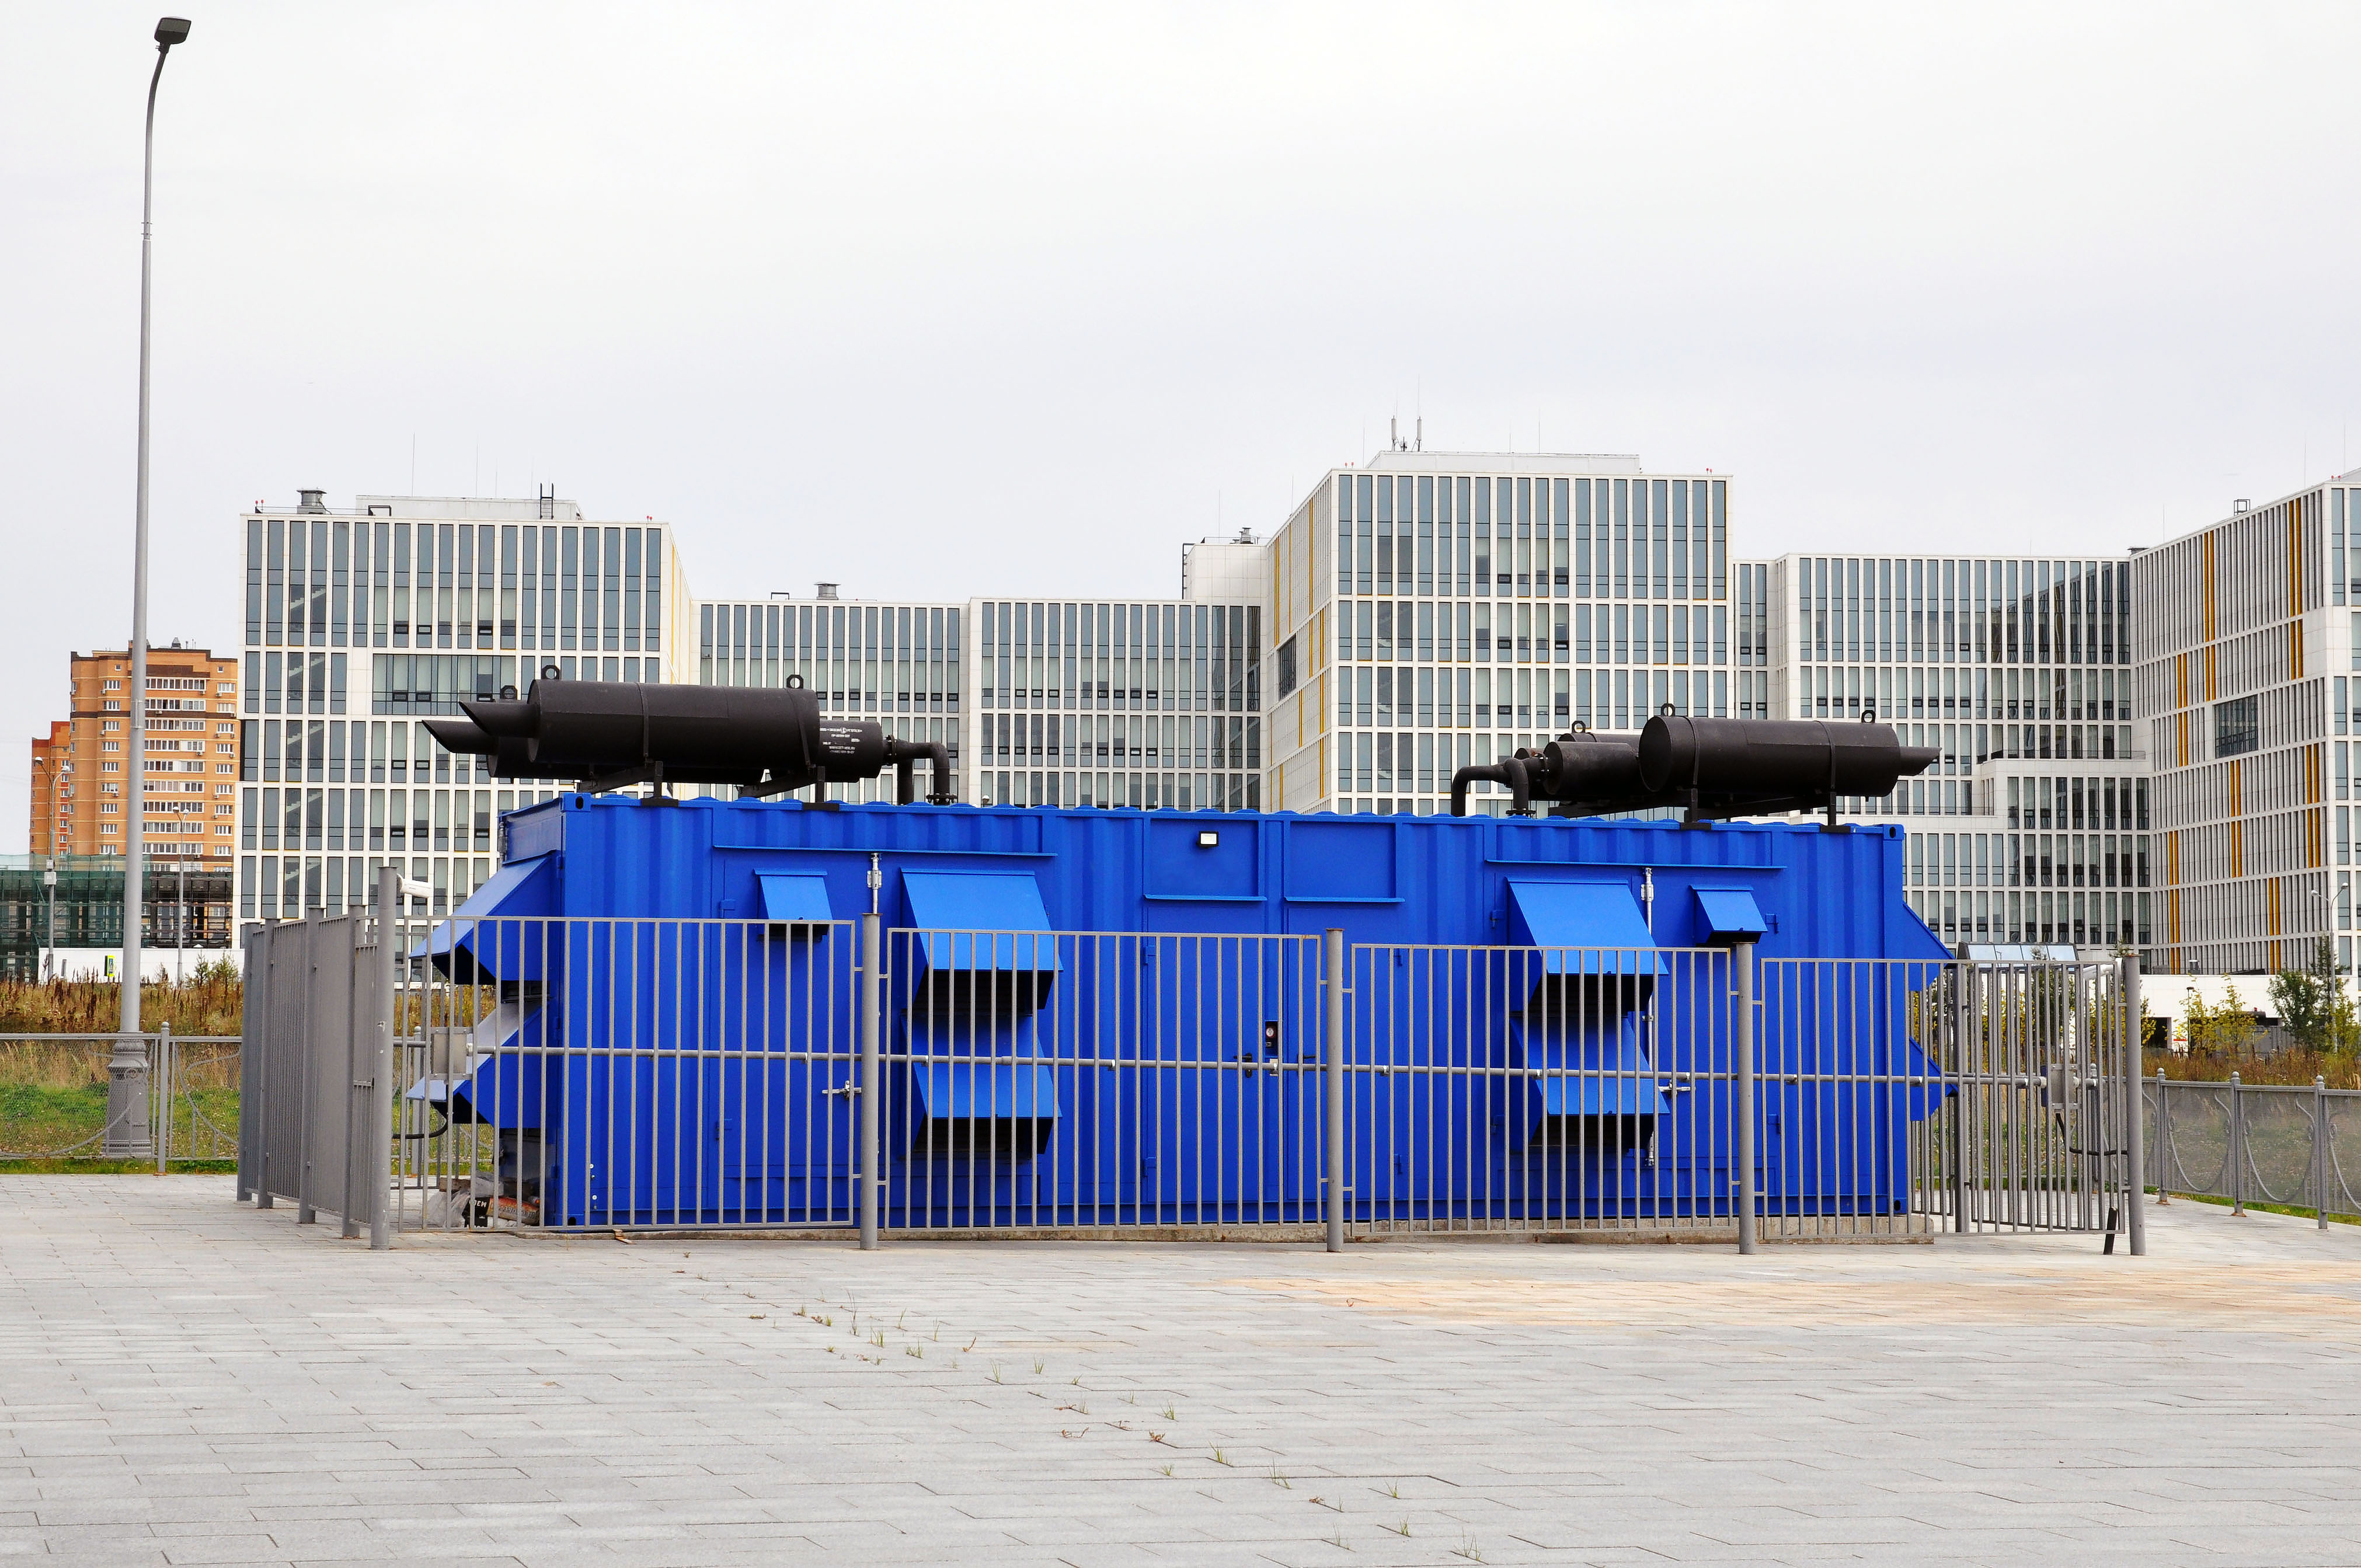 Lightning protection measures and precautions for diesel generator sets